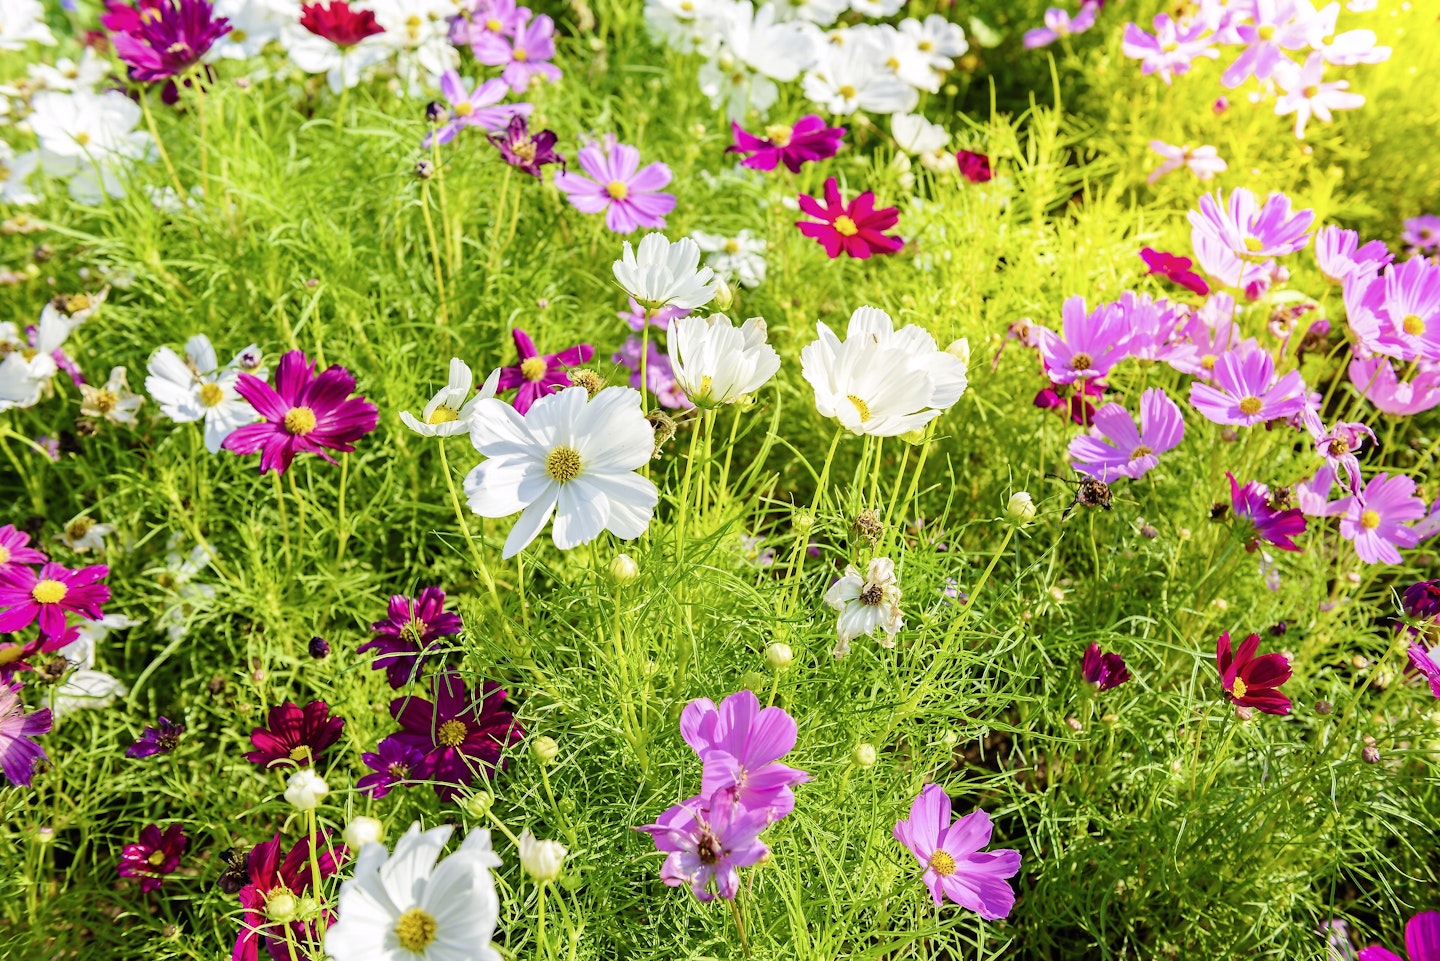 White and pink cosmos